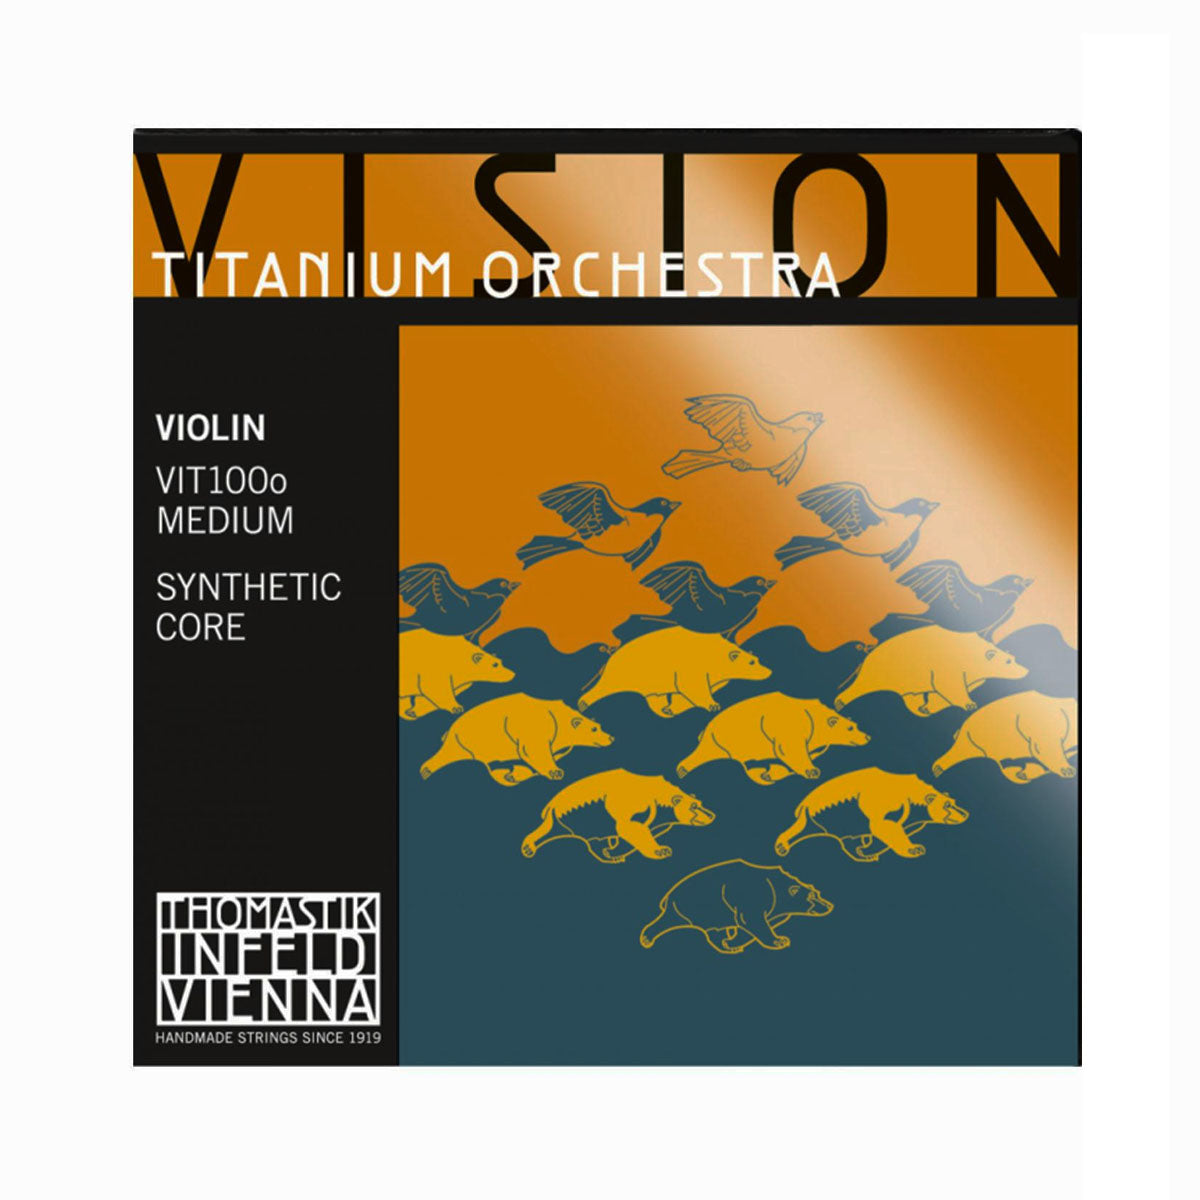 Vision Titanium Violin Strings, Thomastik Infeld, Austria, full size, 4/4, 3/4, 1/2, 1/4, 1/8, 1/16, hand-picked and inspected by Violins and such, with TEO musical Instruments, London Ontario Canada